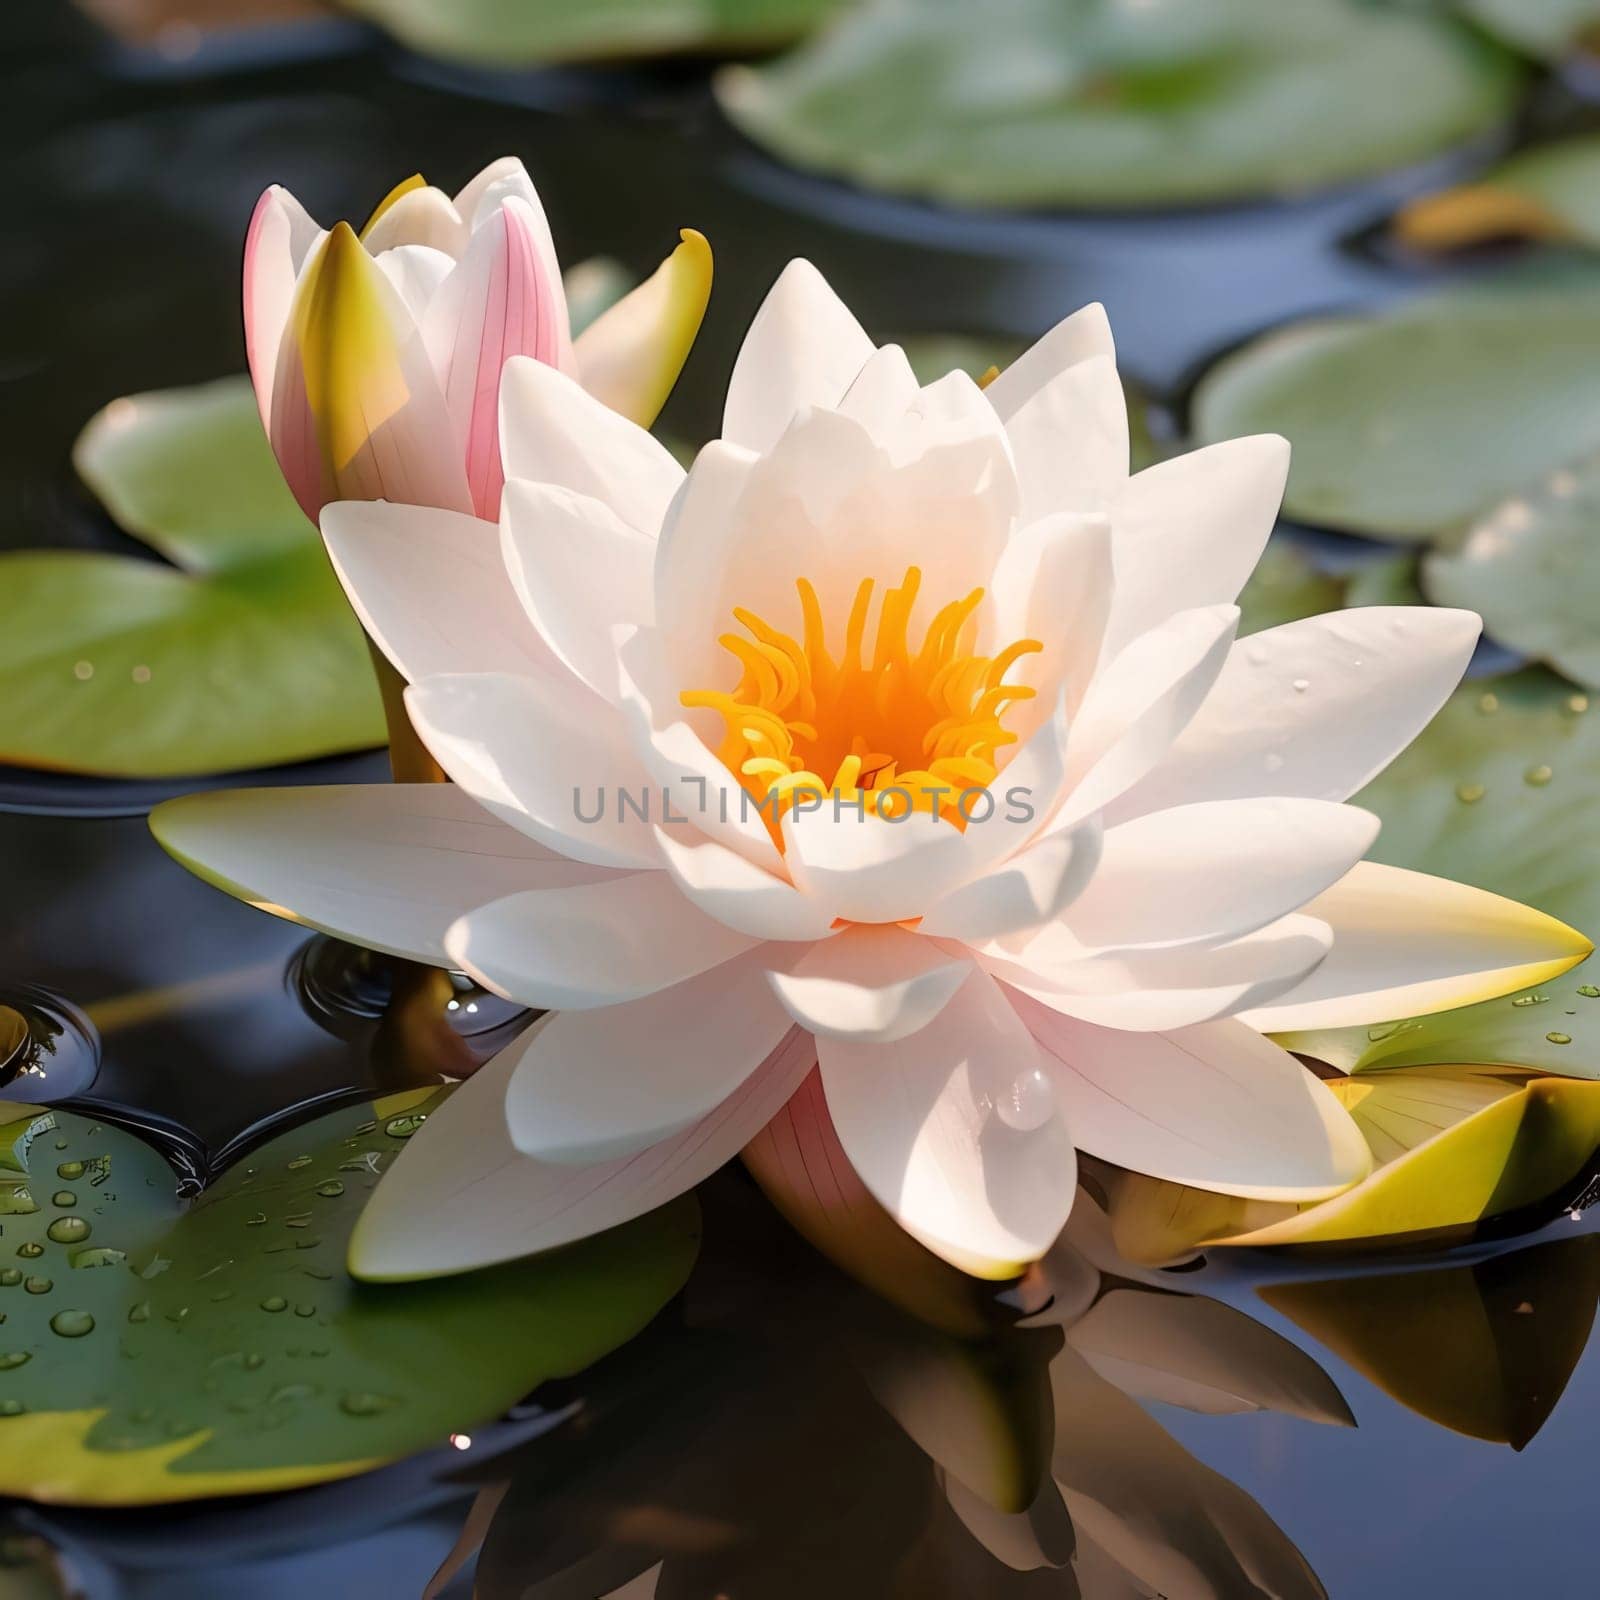 White Water Lily flower on water around green leaves. Flowering flowers, a symbol of spring, new life. A joyful time of nature waking up to life.